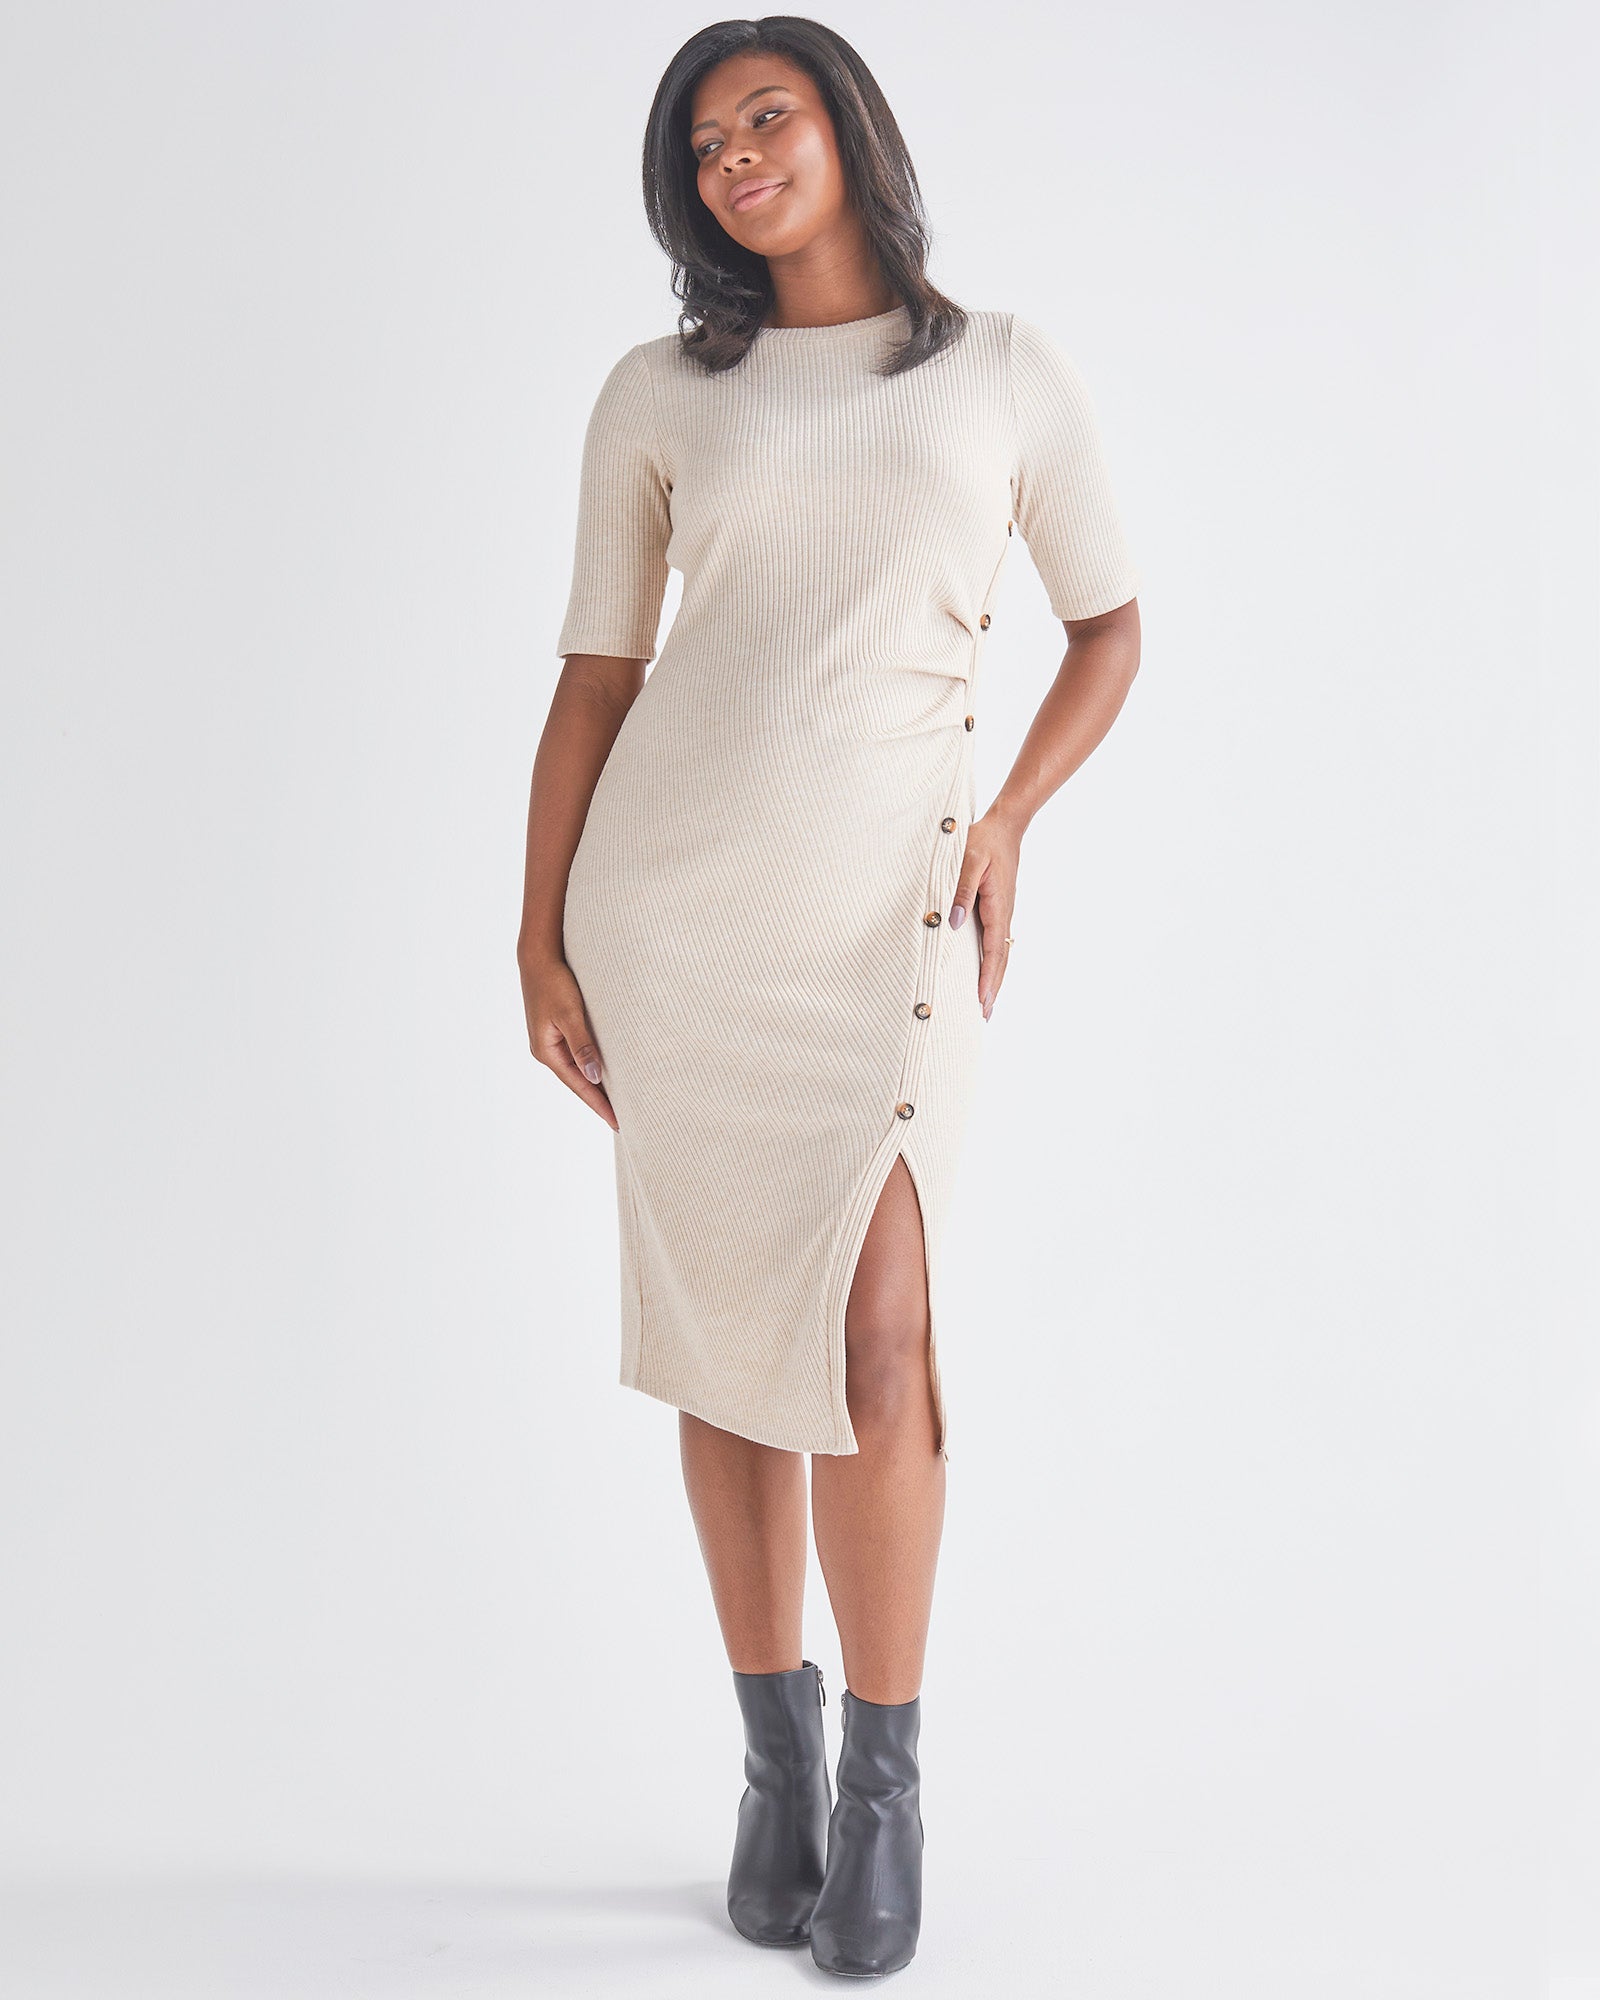 Main view- Maternity Bodycon Dress- Side Button detail Fashion-forward Design Functionality Comfort Flattering Fit from AngelMaternity